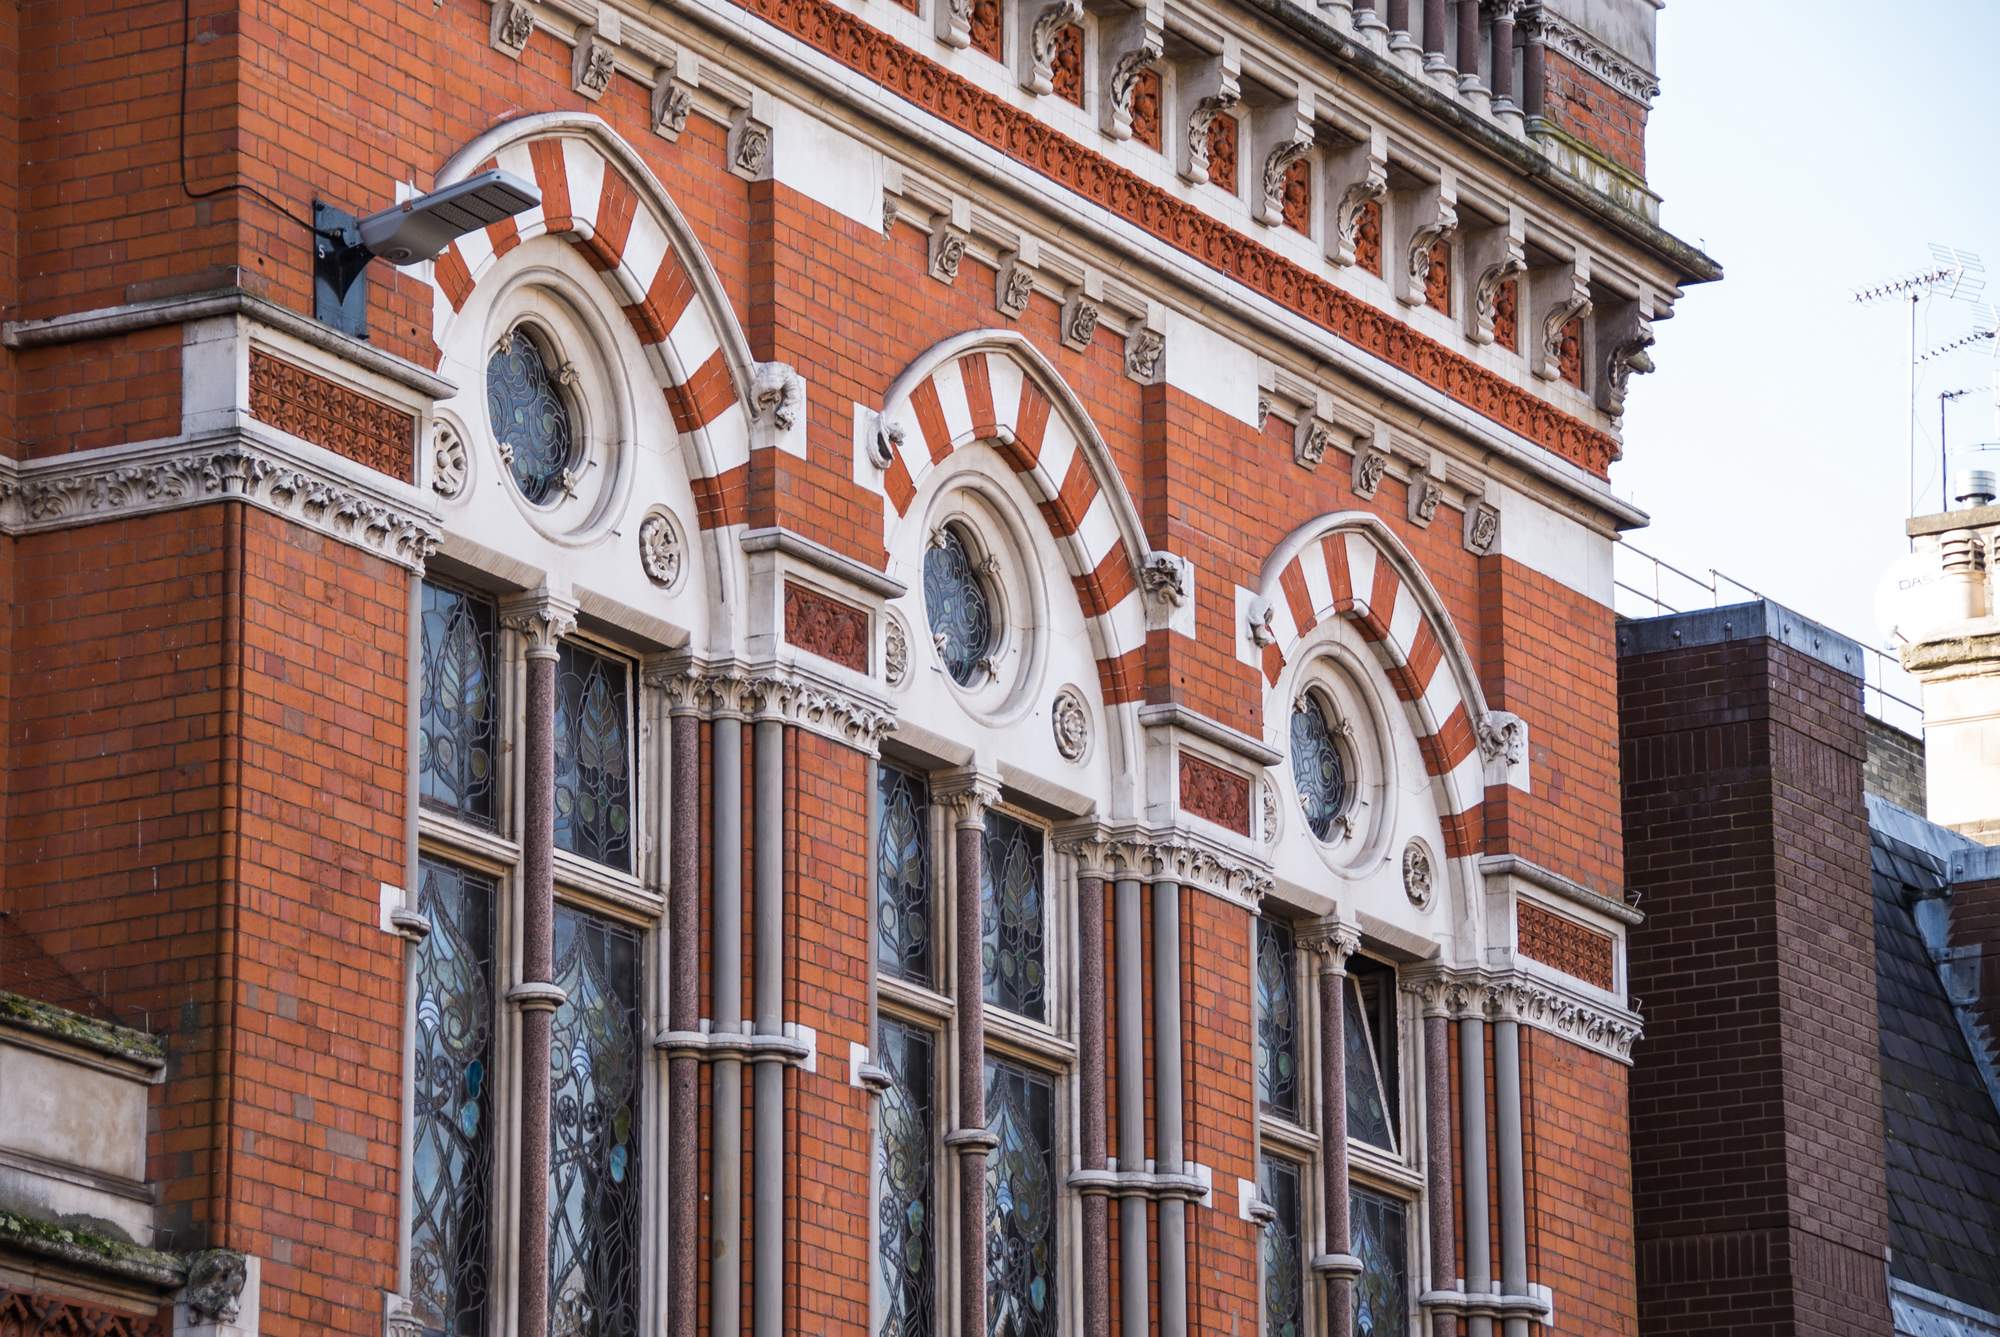 The ornate brickwork is a key feature of the design -